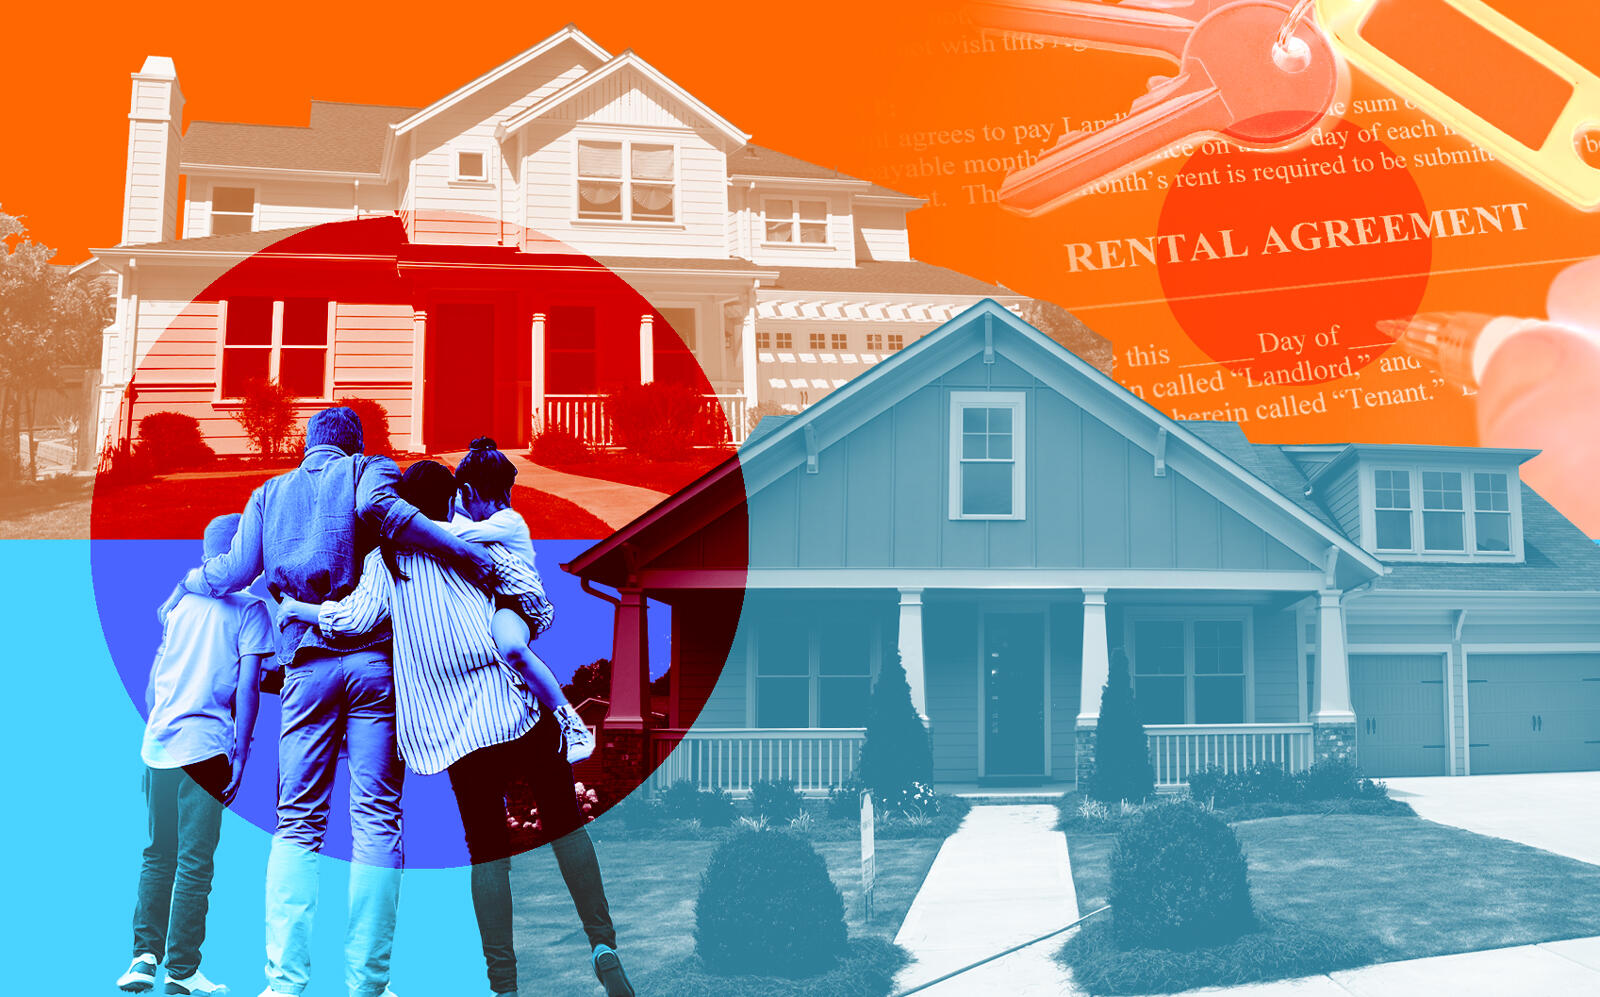 Single-family rentals are increasingly seen as a more realistic alternative to ownership, given the hot housing market and income inequality. (iStock)